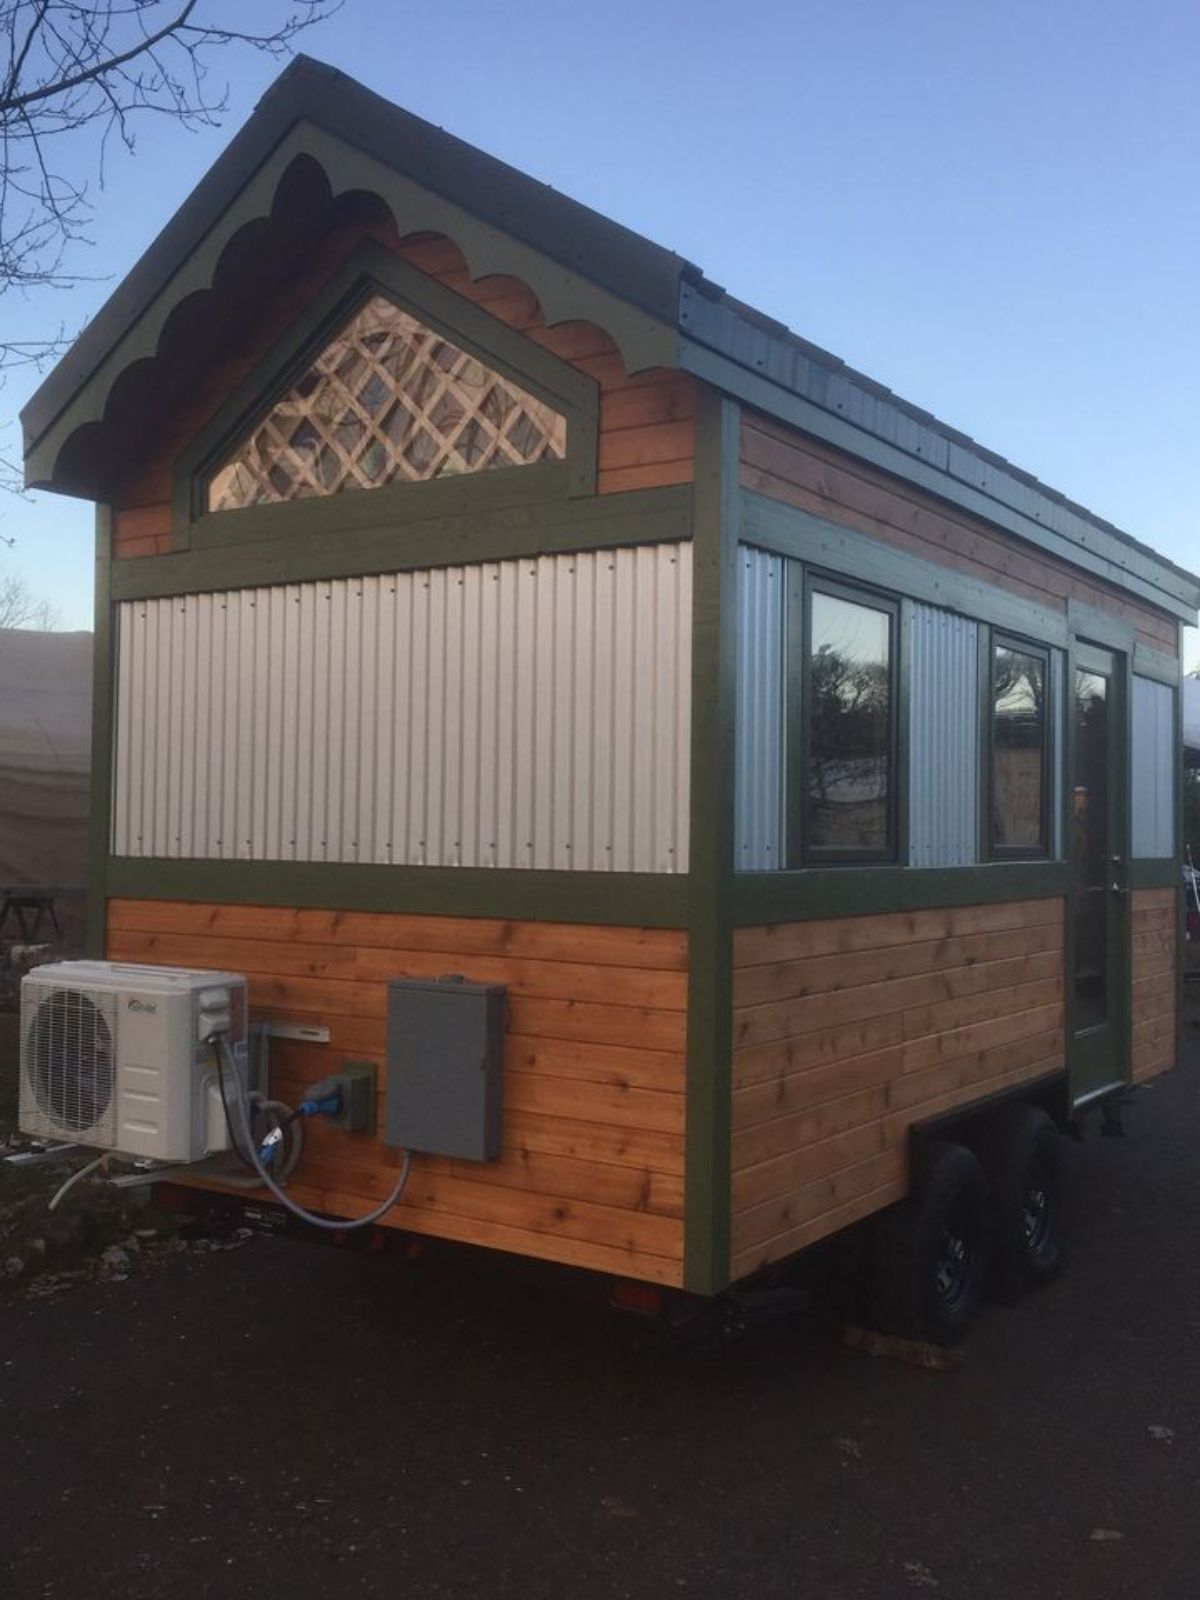 Artisan Tiny Home from outside